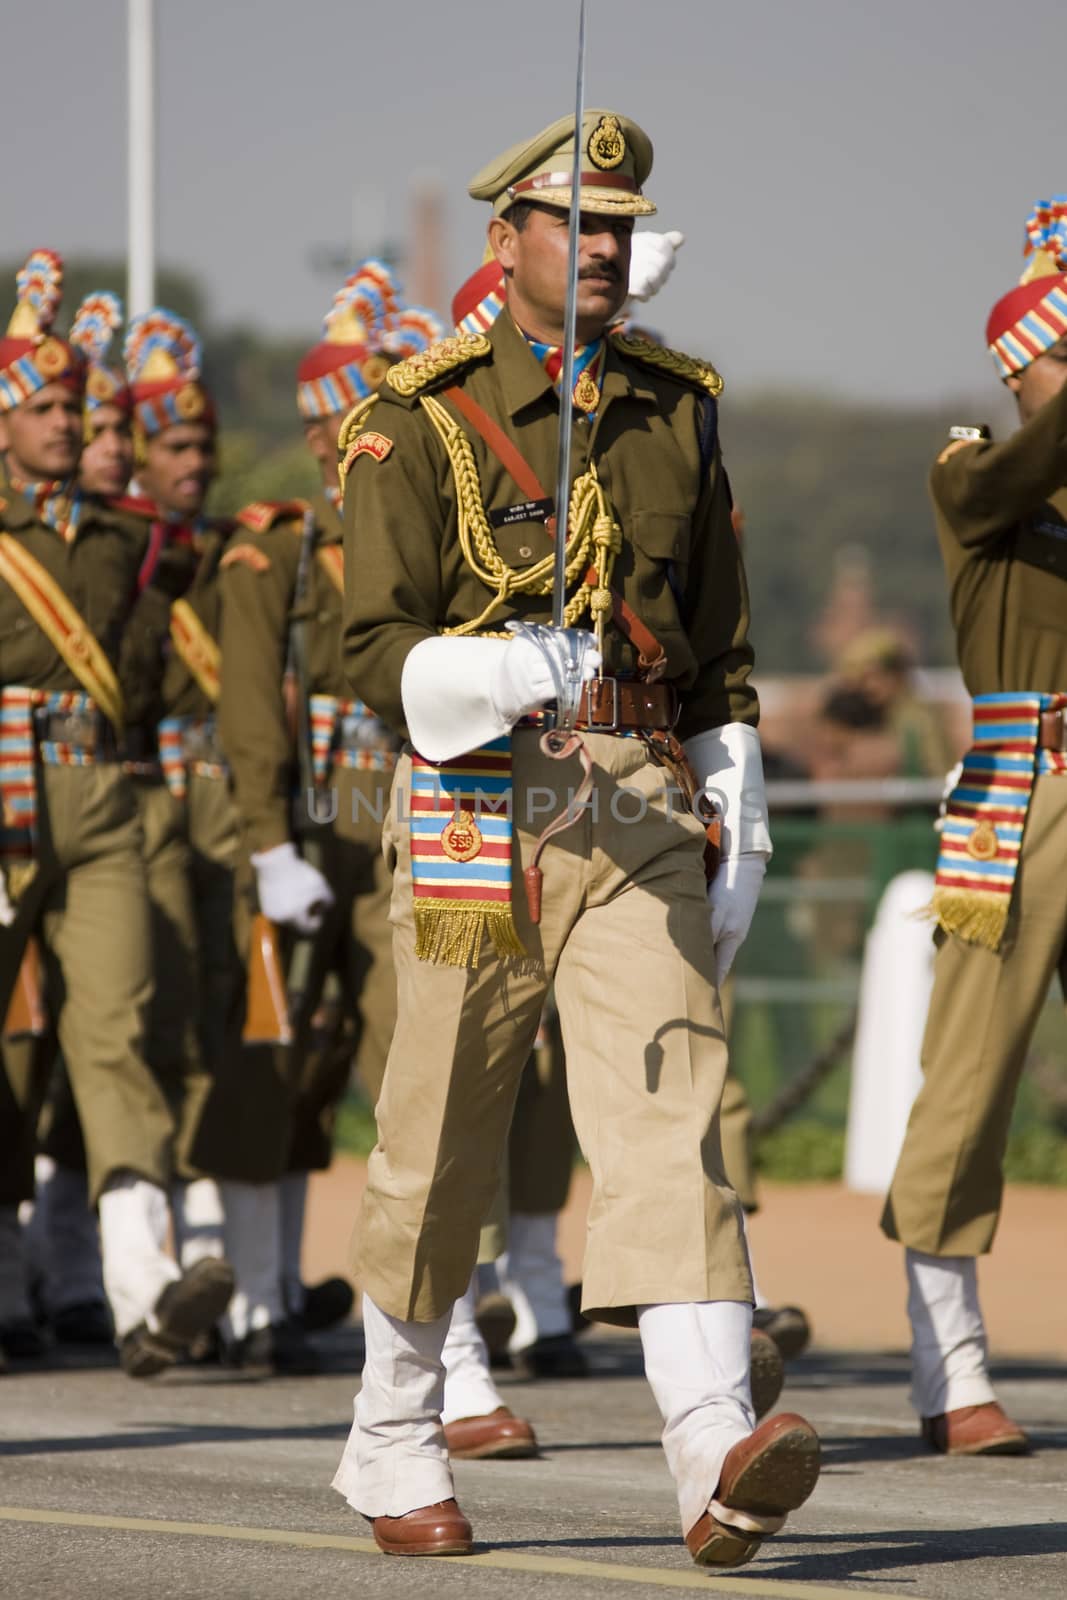 Officer leading his men marching down the Raj Path in preparation for Republic Day Parade, New Delhi, India